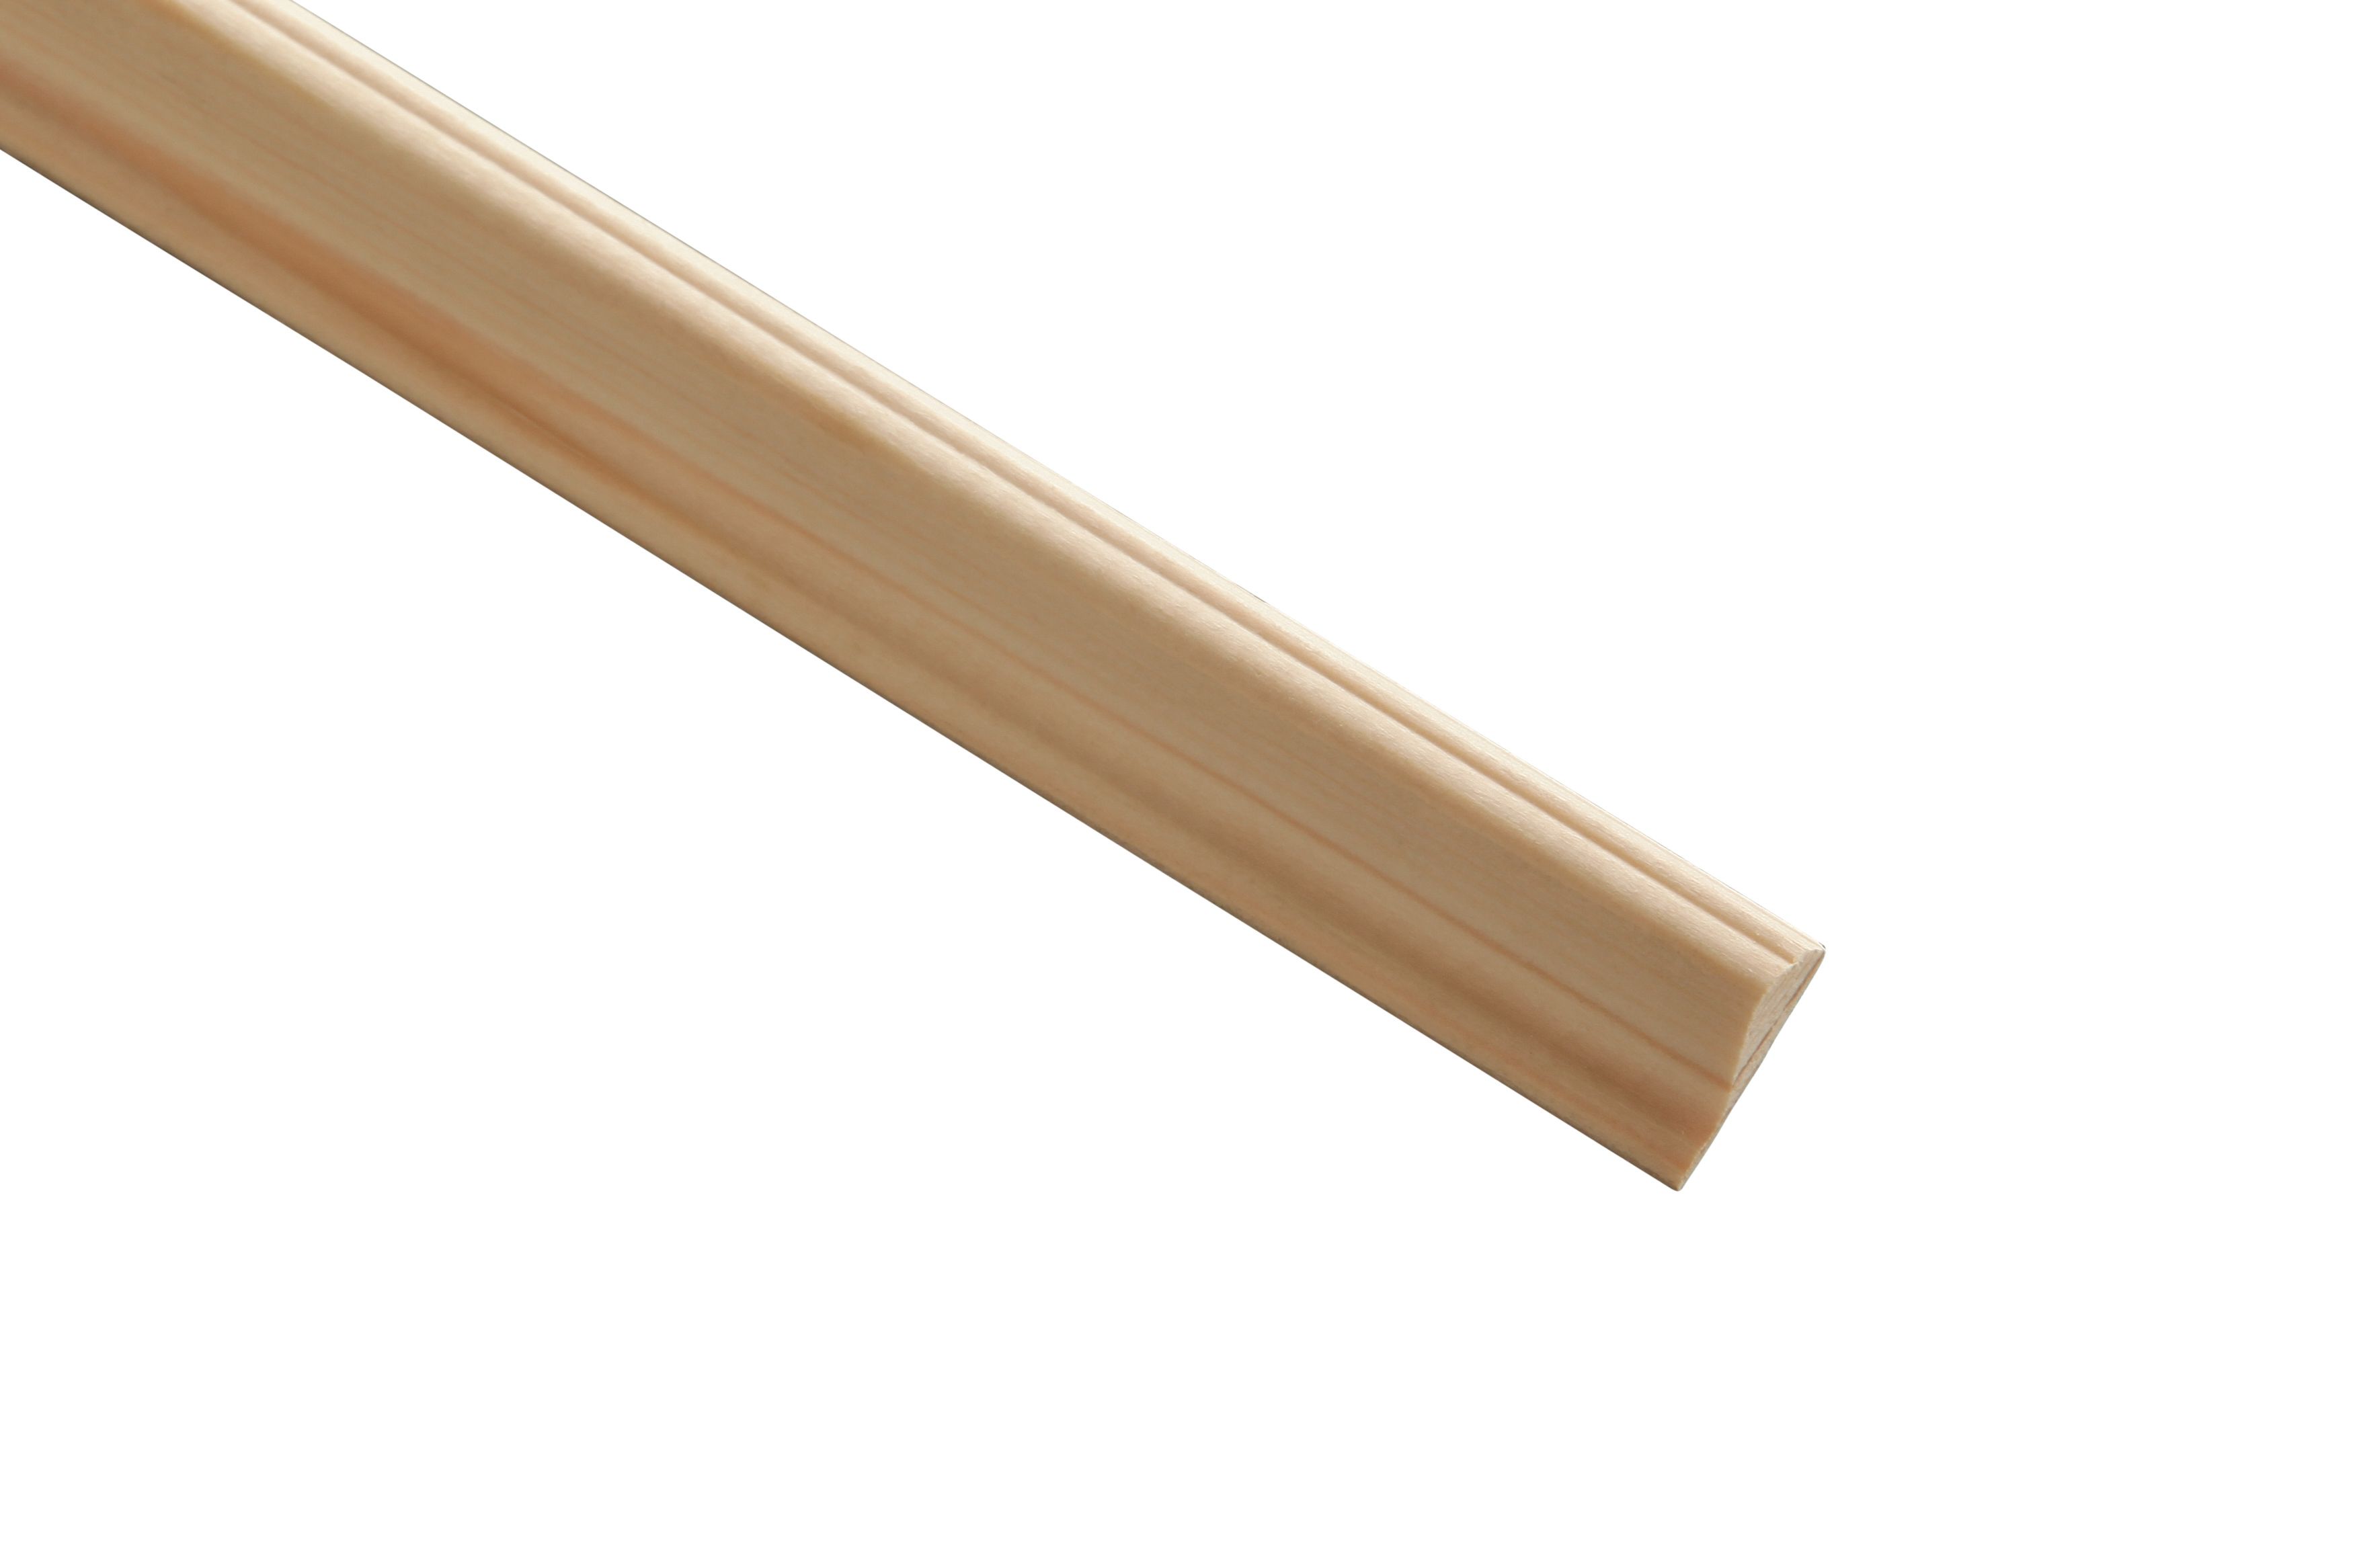 Image of Wickes Pine Decorative Cover Moulding - 8 x 21 x 2400mm